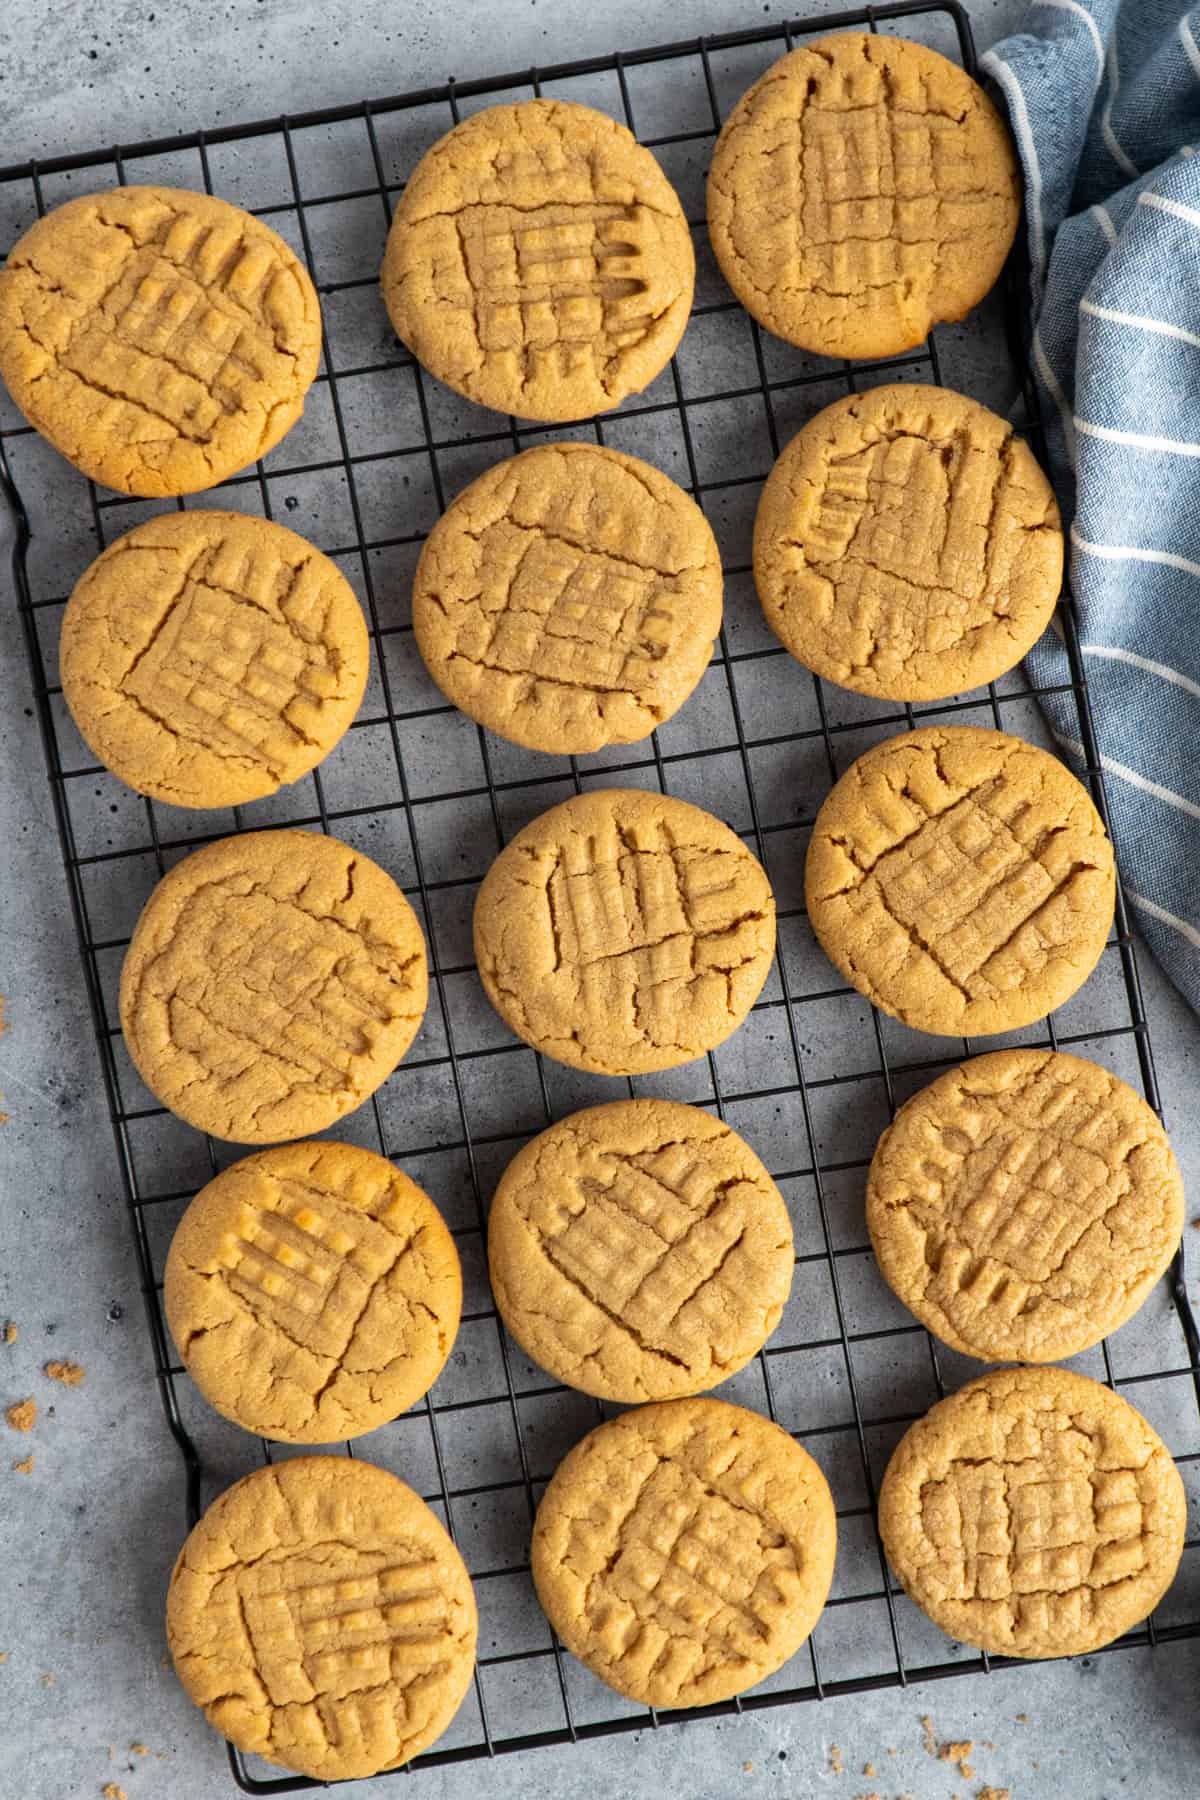 Peanut butter cookies on wire cooling rack.